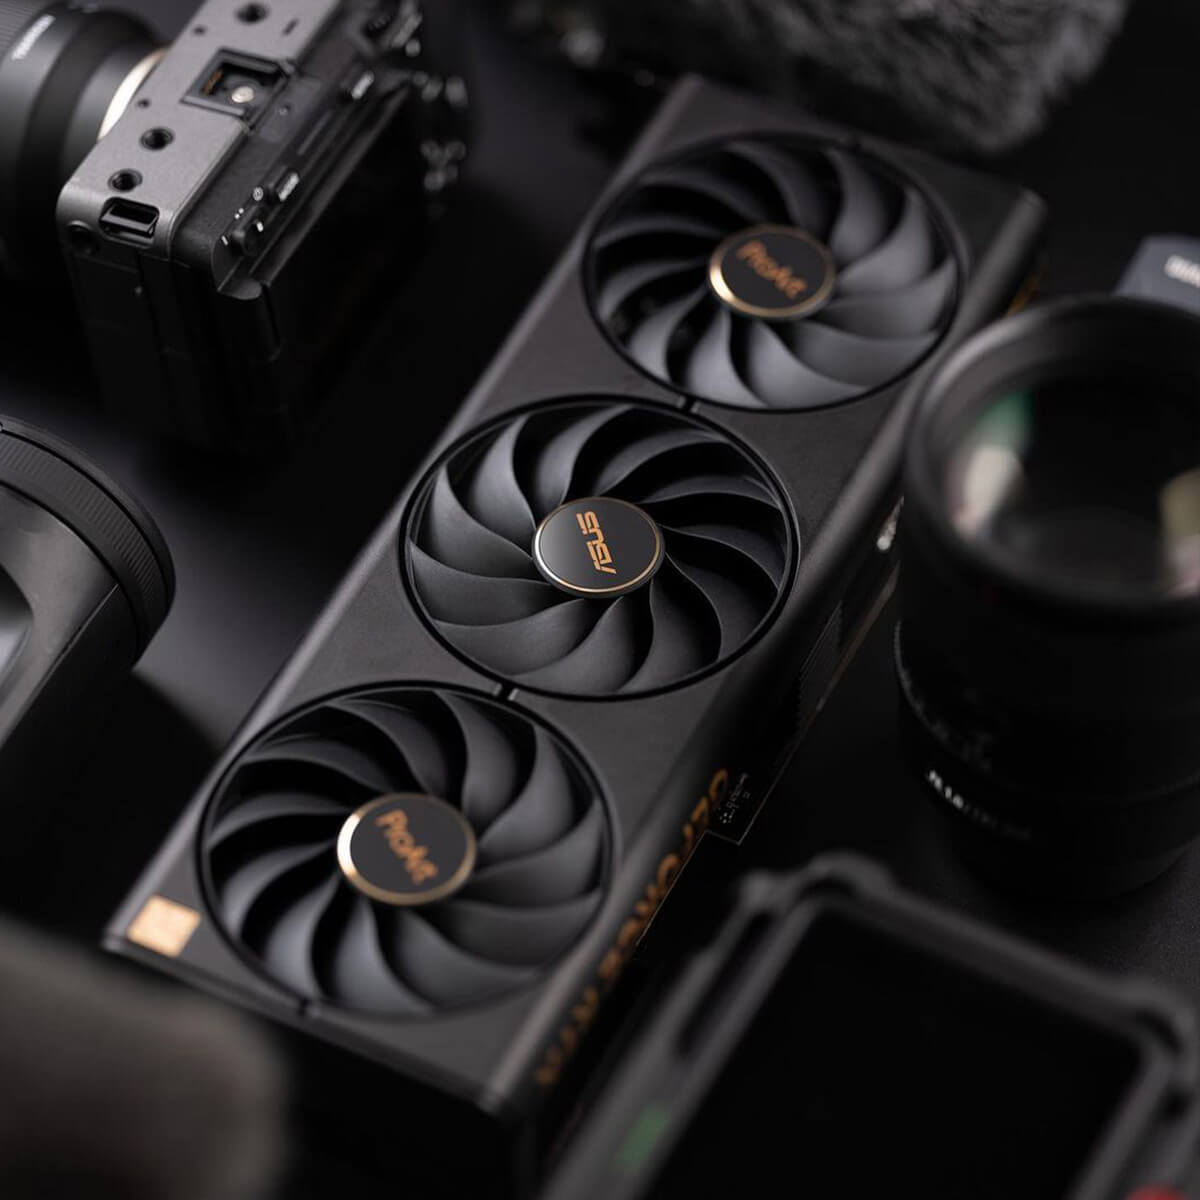 Front view of a ProArt series graphics card lying in the center of other photography tools